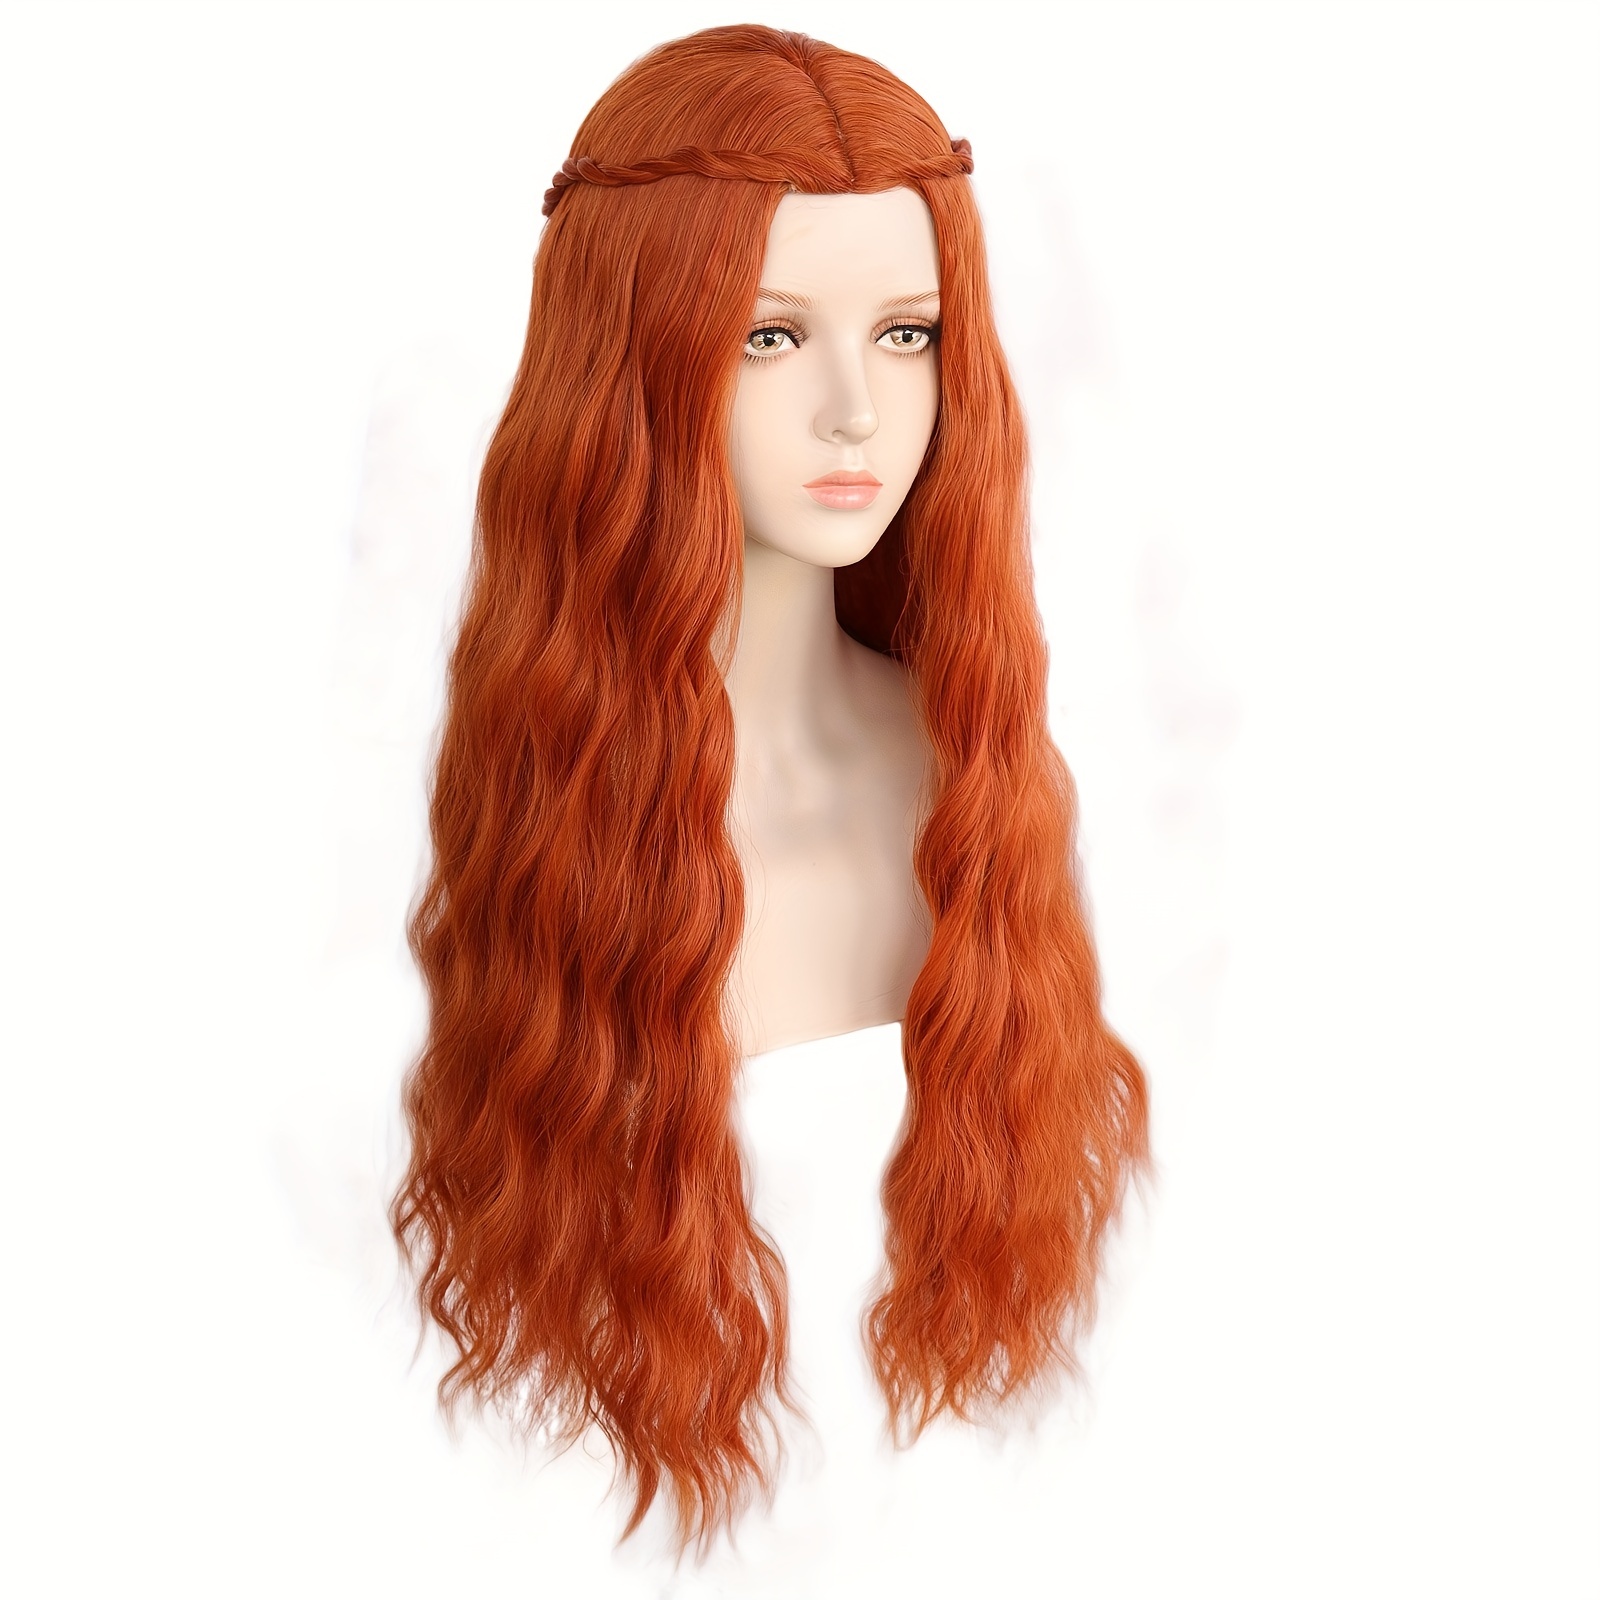 OYSRONG 31.5' Women Long Curly Anime Costume Cosplay Wig (gray): Buy Online  at Best Price in UAE - Amazon.ae